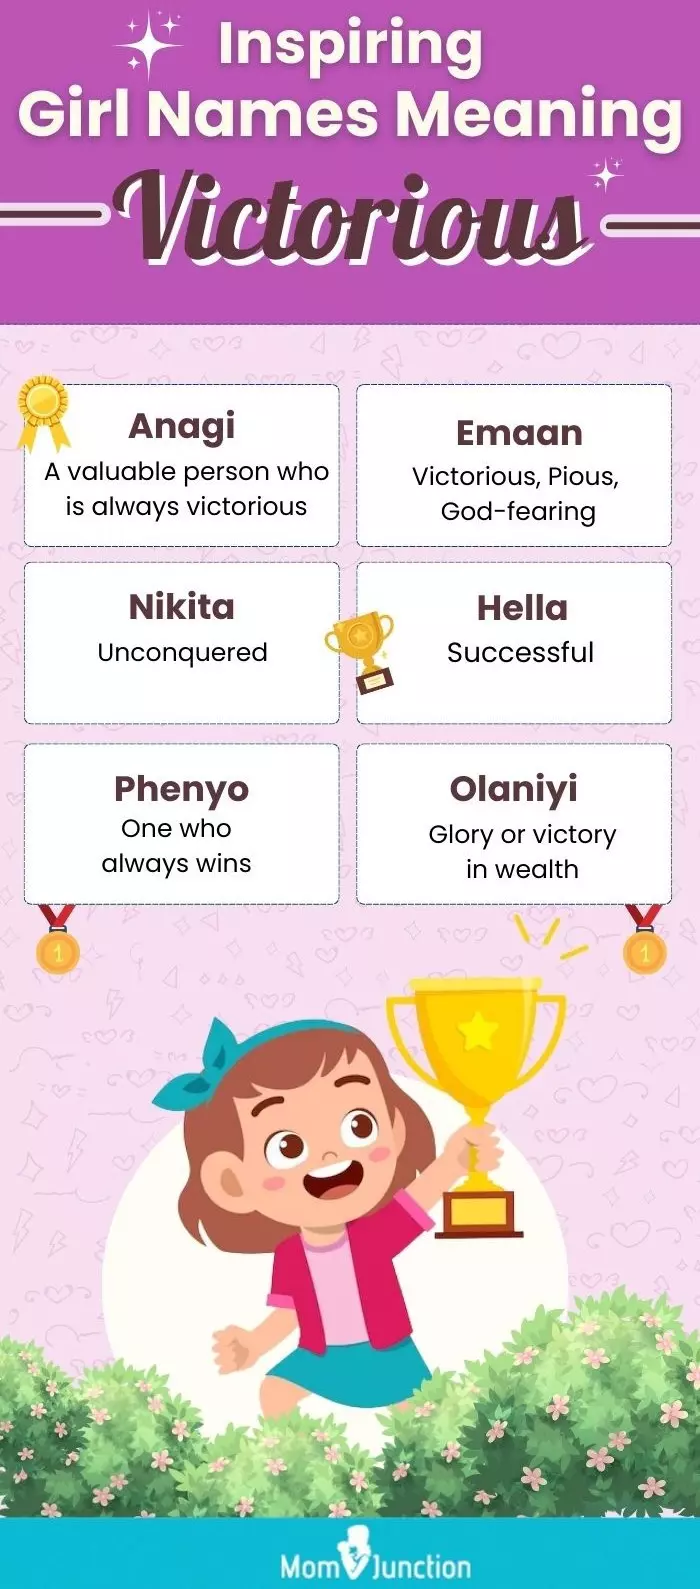 Inspiring Girl Names Meaning Victorious (infographic)